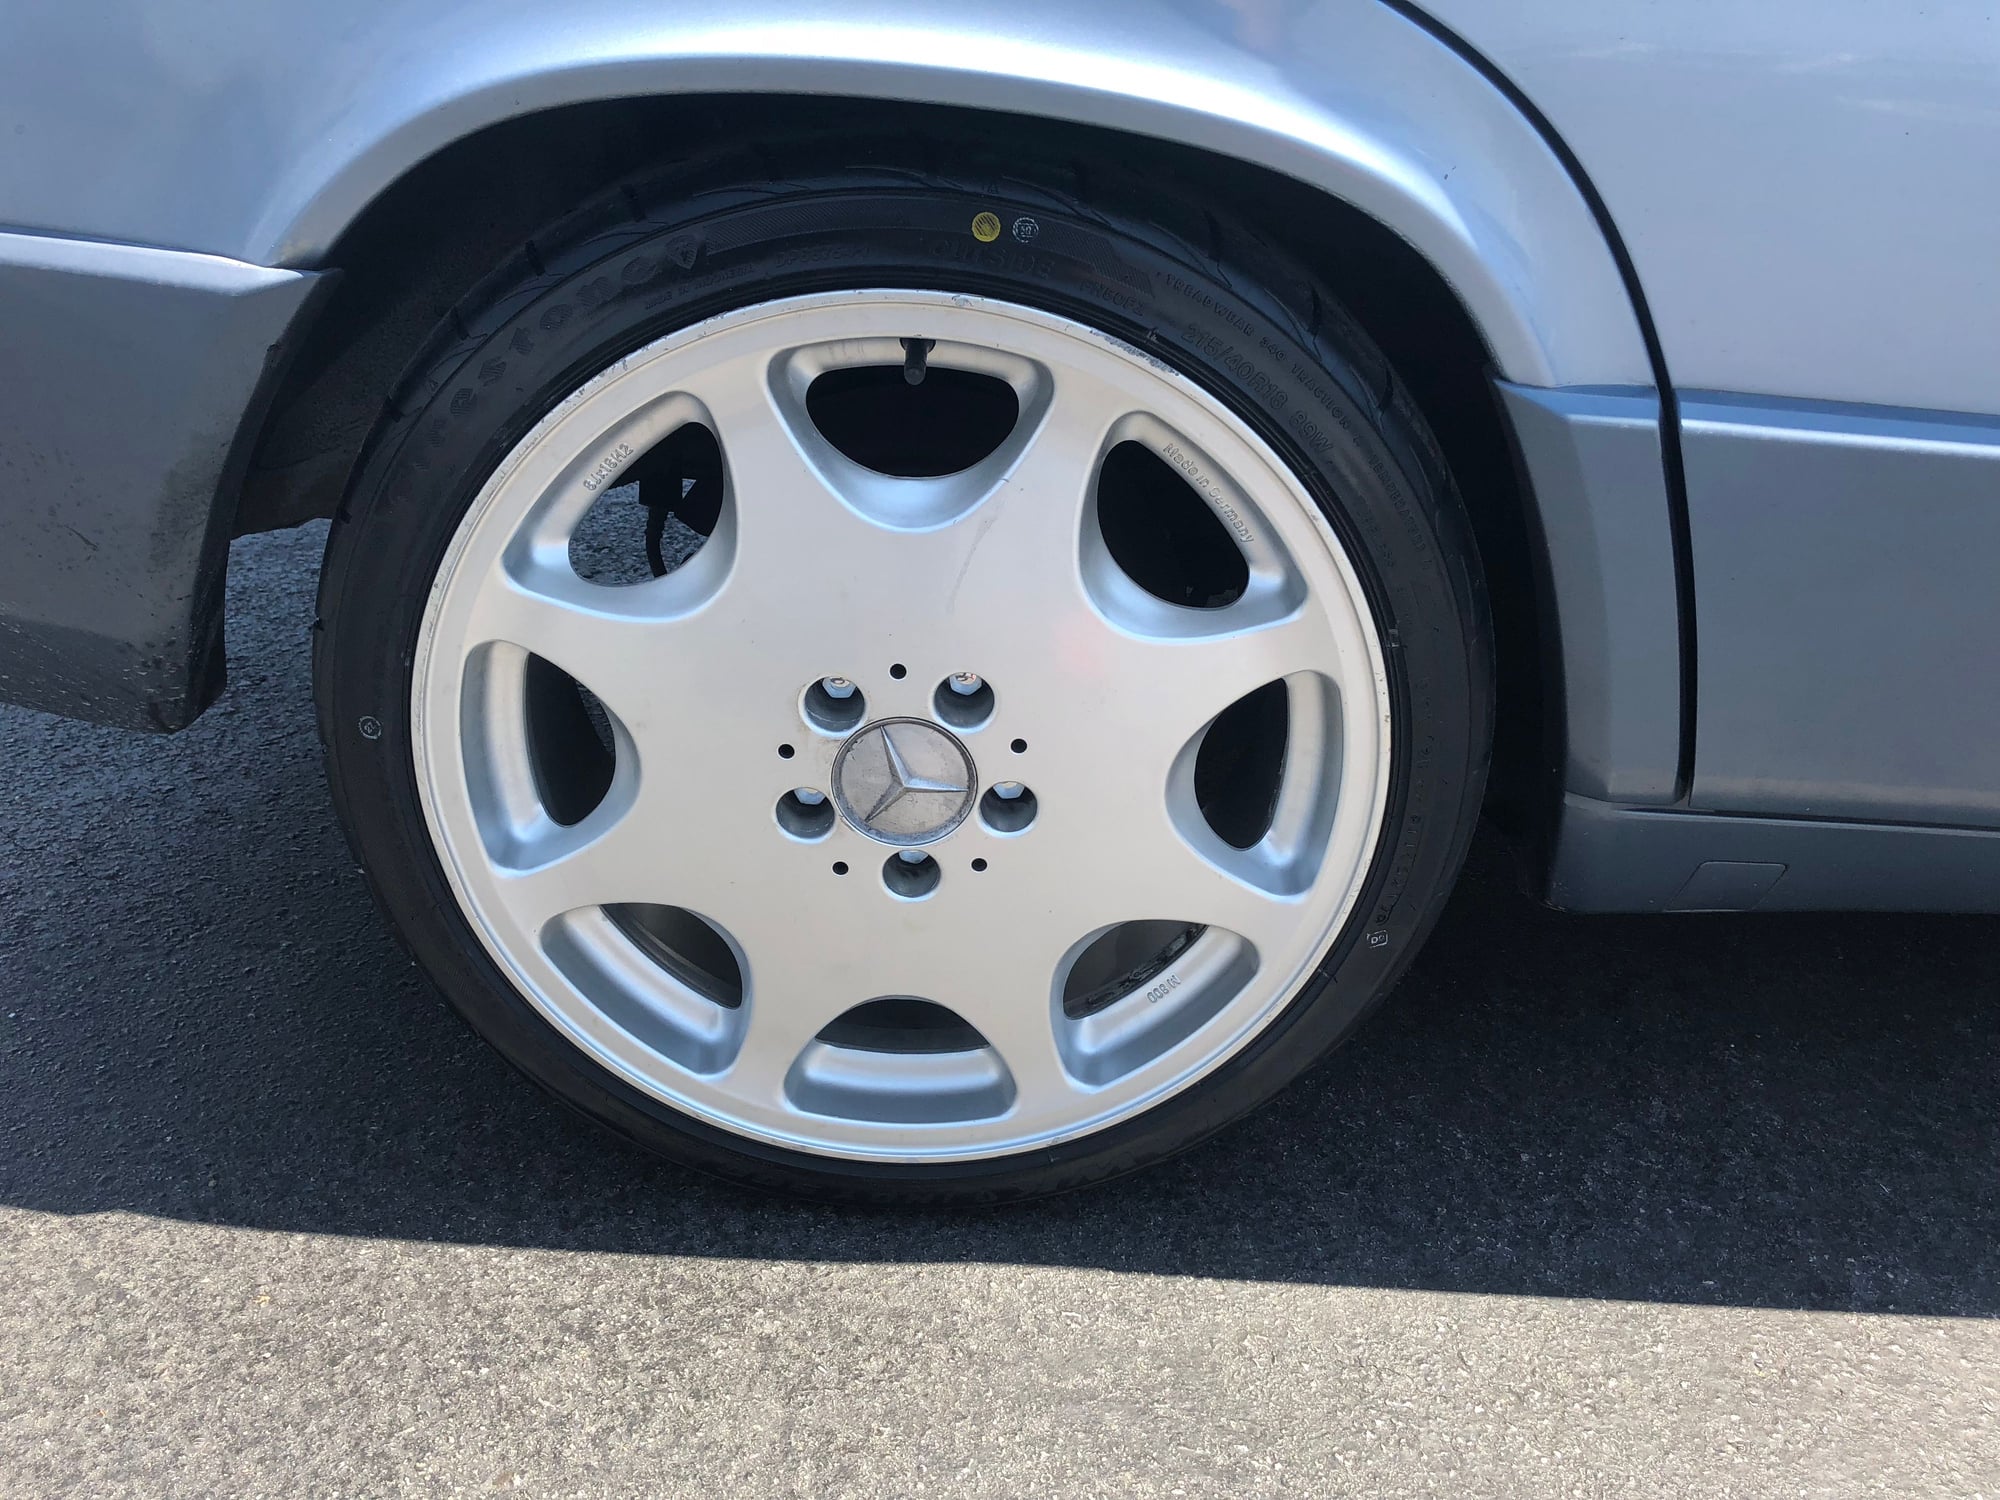 Wheels and Tires/Axles - Rare 8 hole 18x8 Rial ARC M800 for sale with new tires $1500 + Shipping - Used - Miami, FL 33156, United States